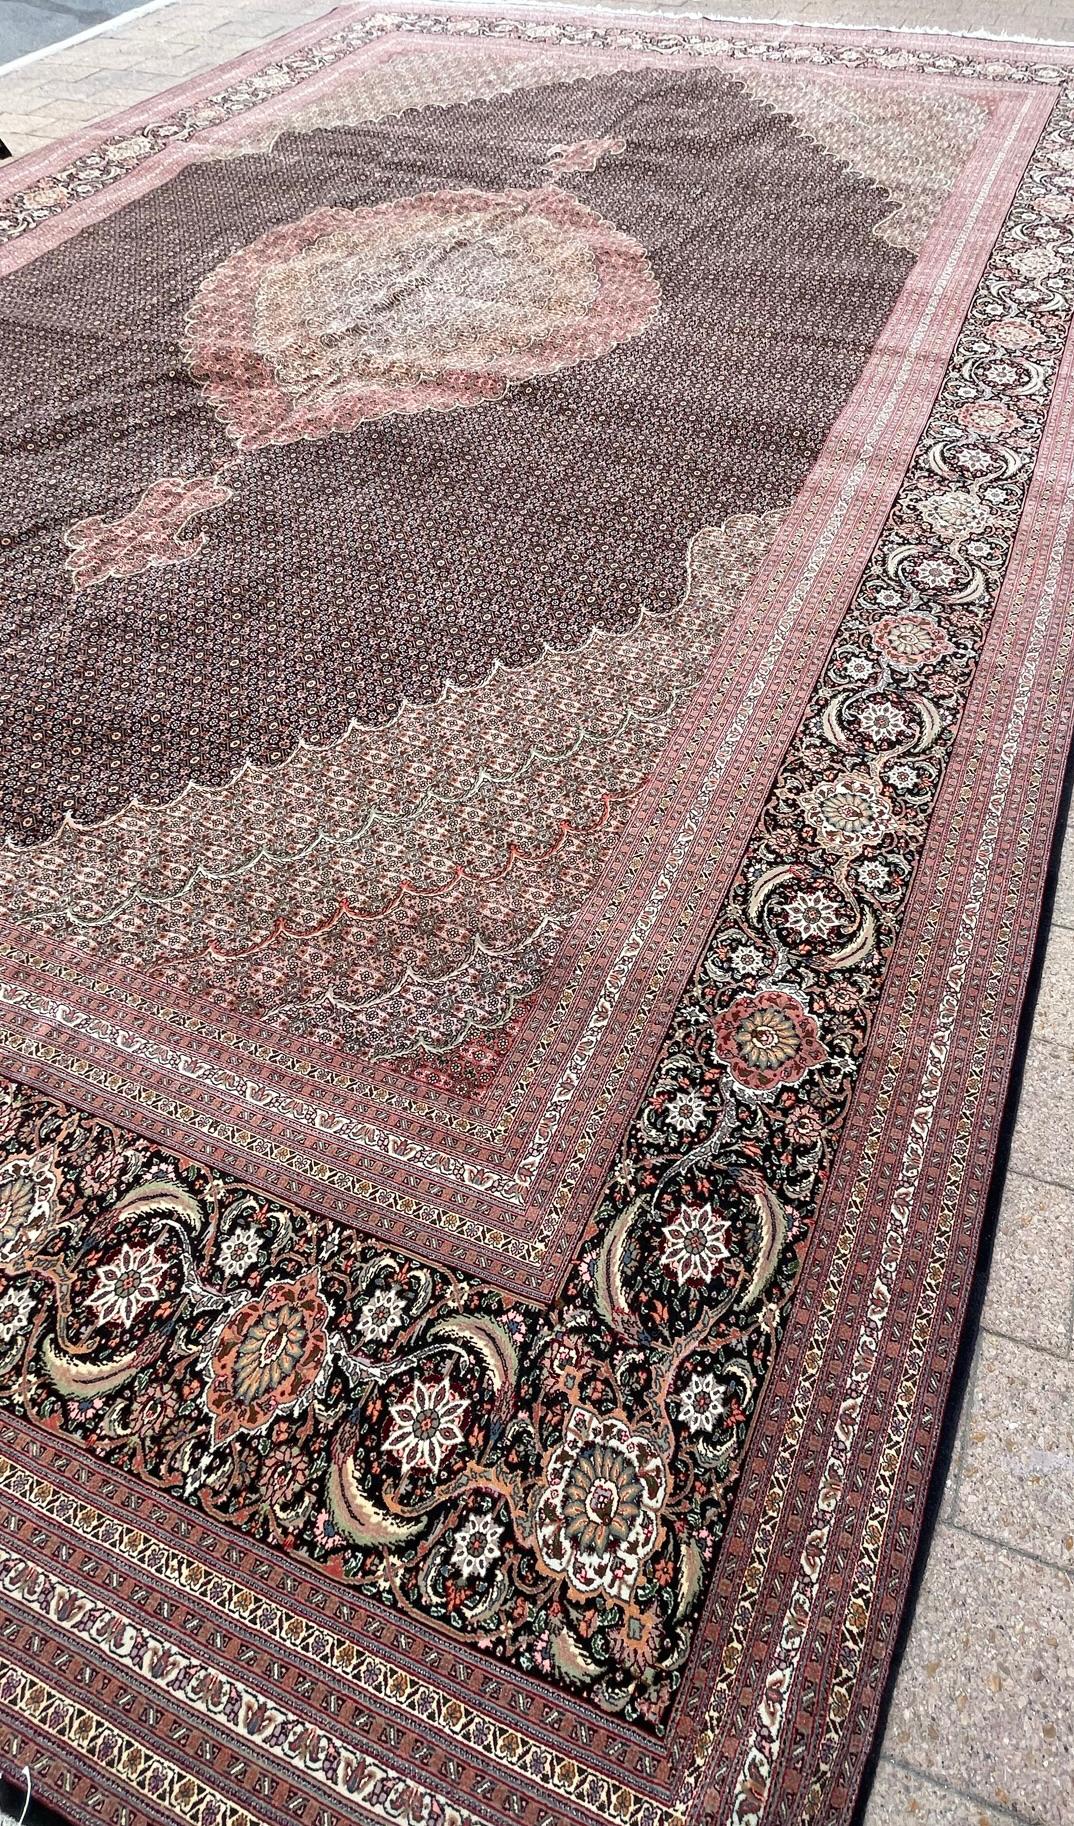 Fine Persian Tabriz Mahi Carpet, Fifty rage Quality. Typical of the Mahi carpet is their use of the distinctive symmetric Turkish knot and fine Kurk wool with silk accents. The Tabriz Mahi likewise possesses a high knot per square inch count (KPSI)